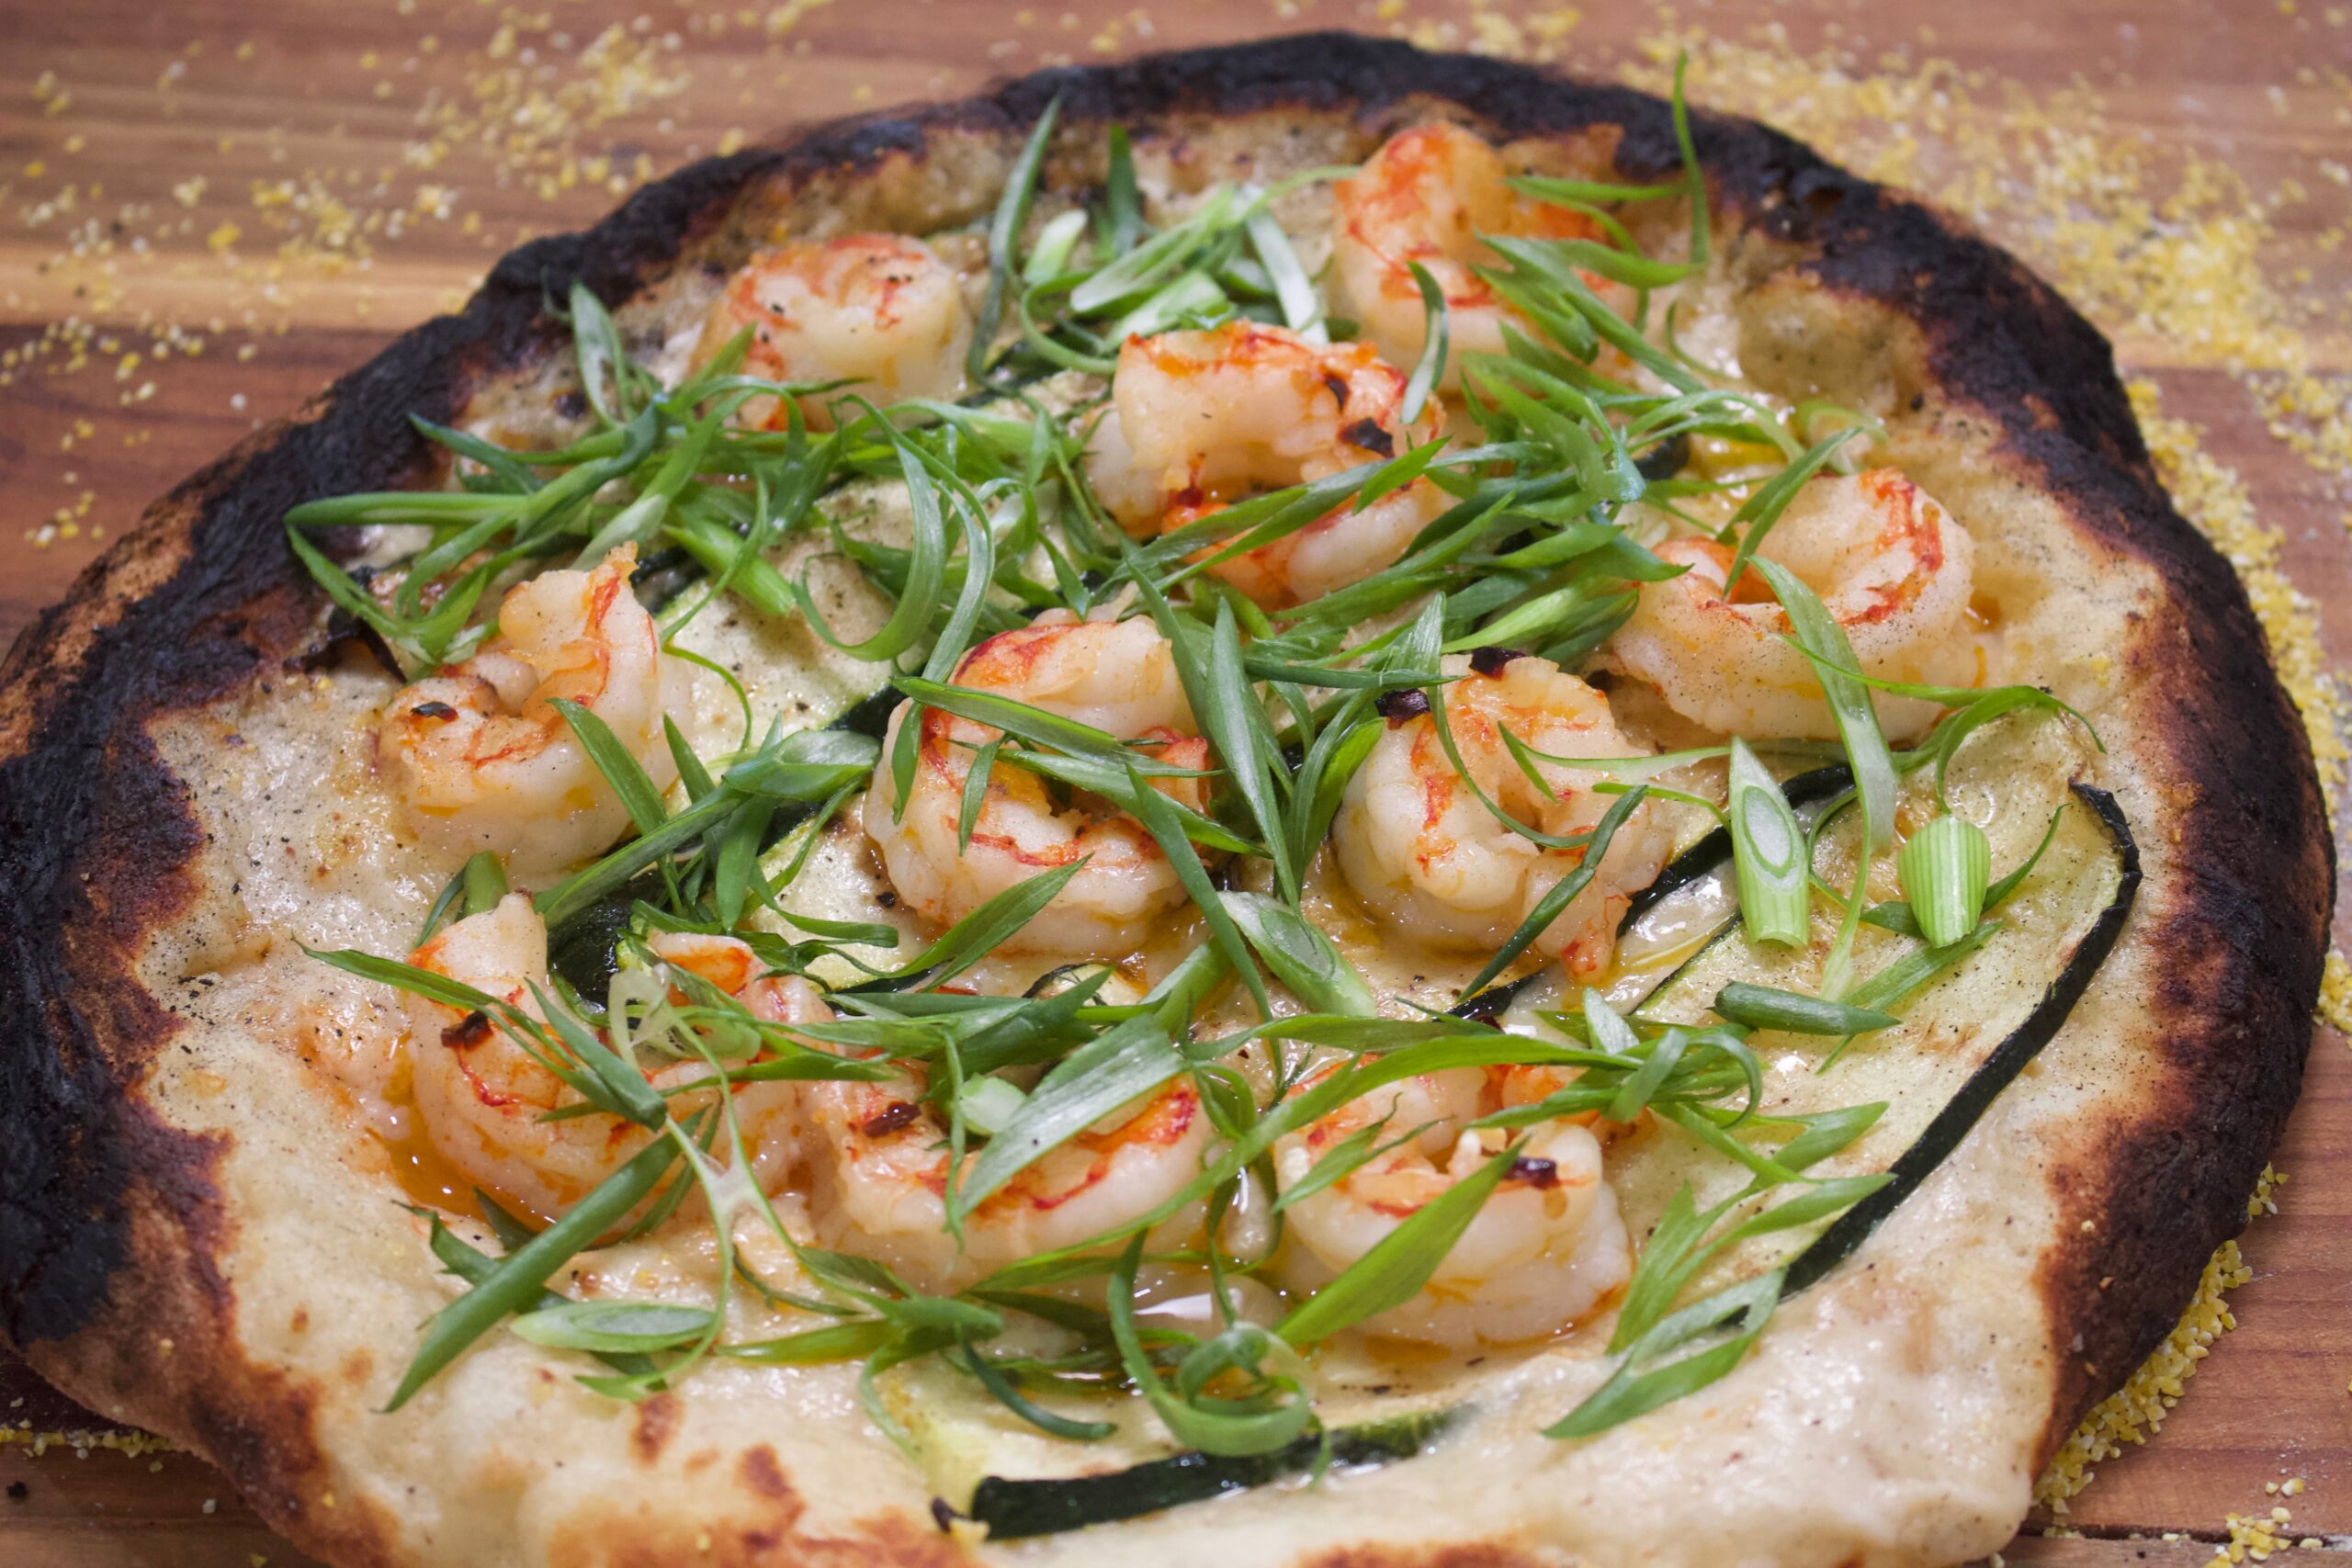 A plate of food with shrimp and green onions.